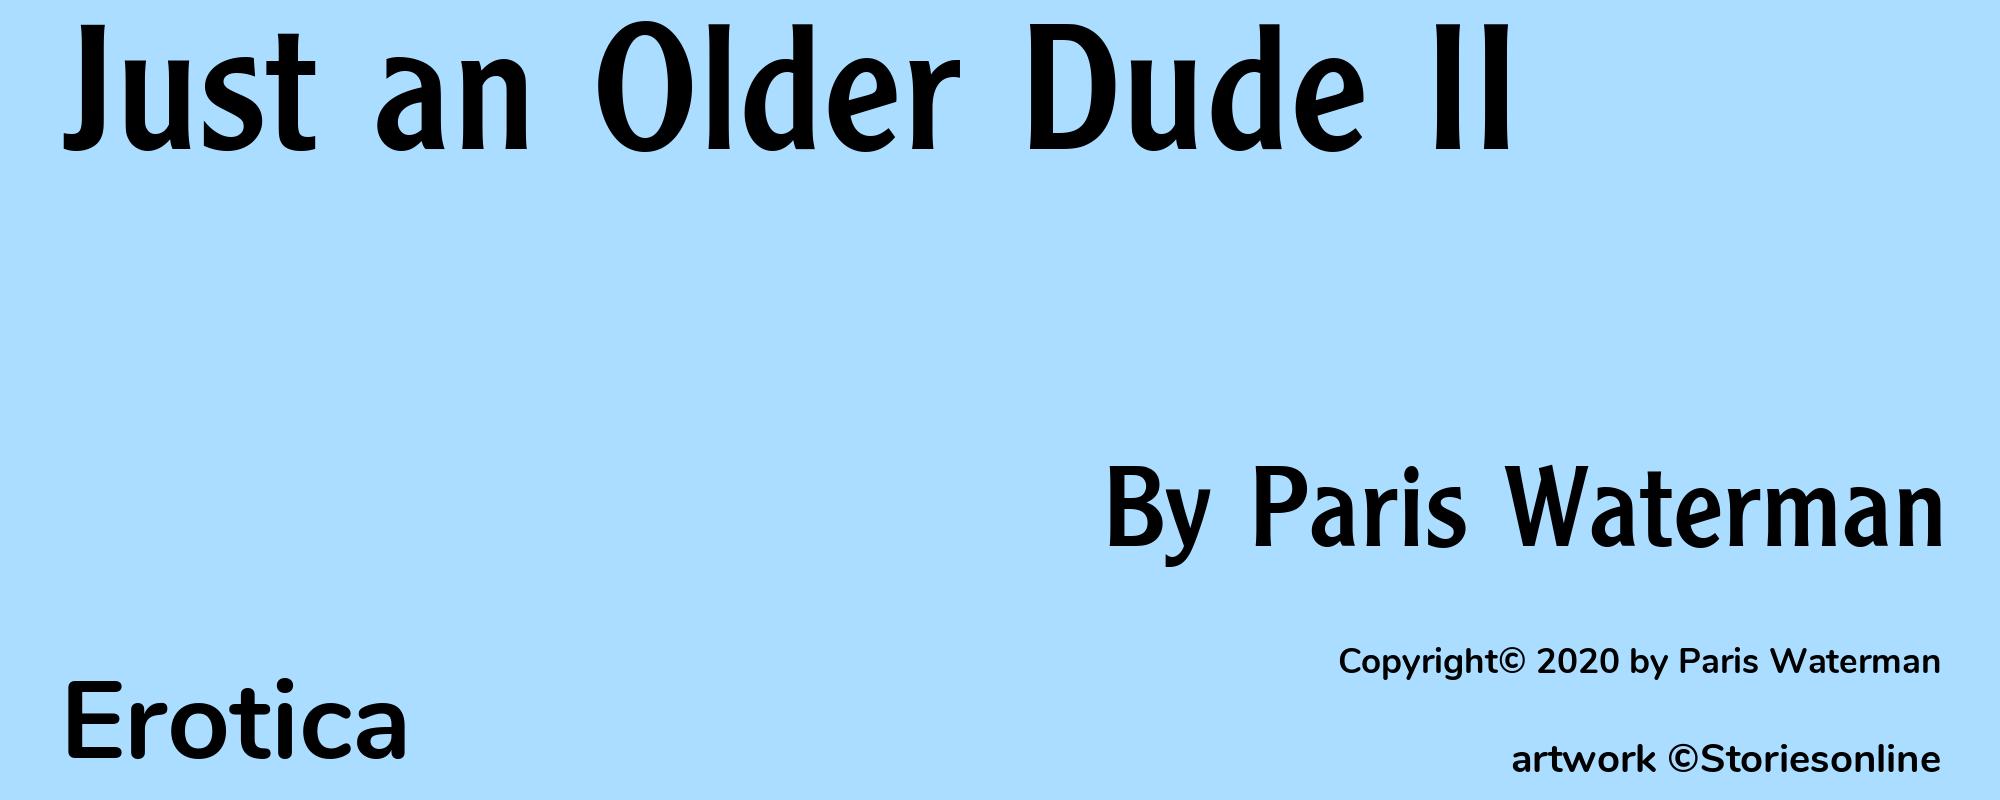 Just an Older Dude II - Cover